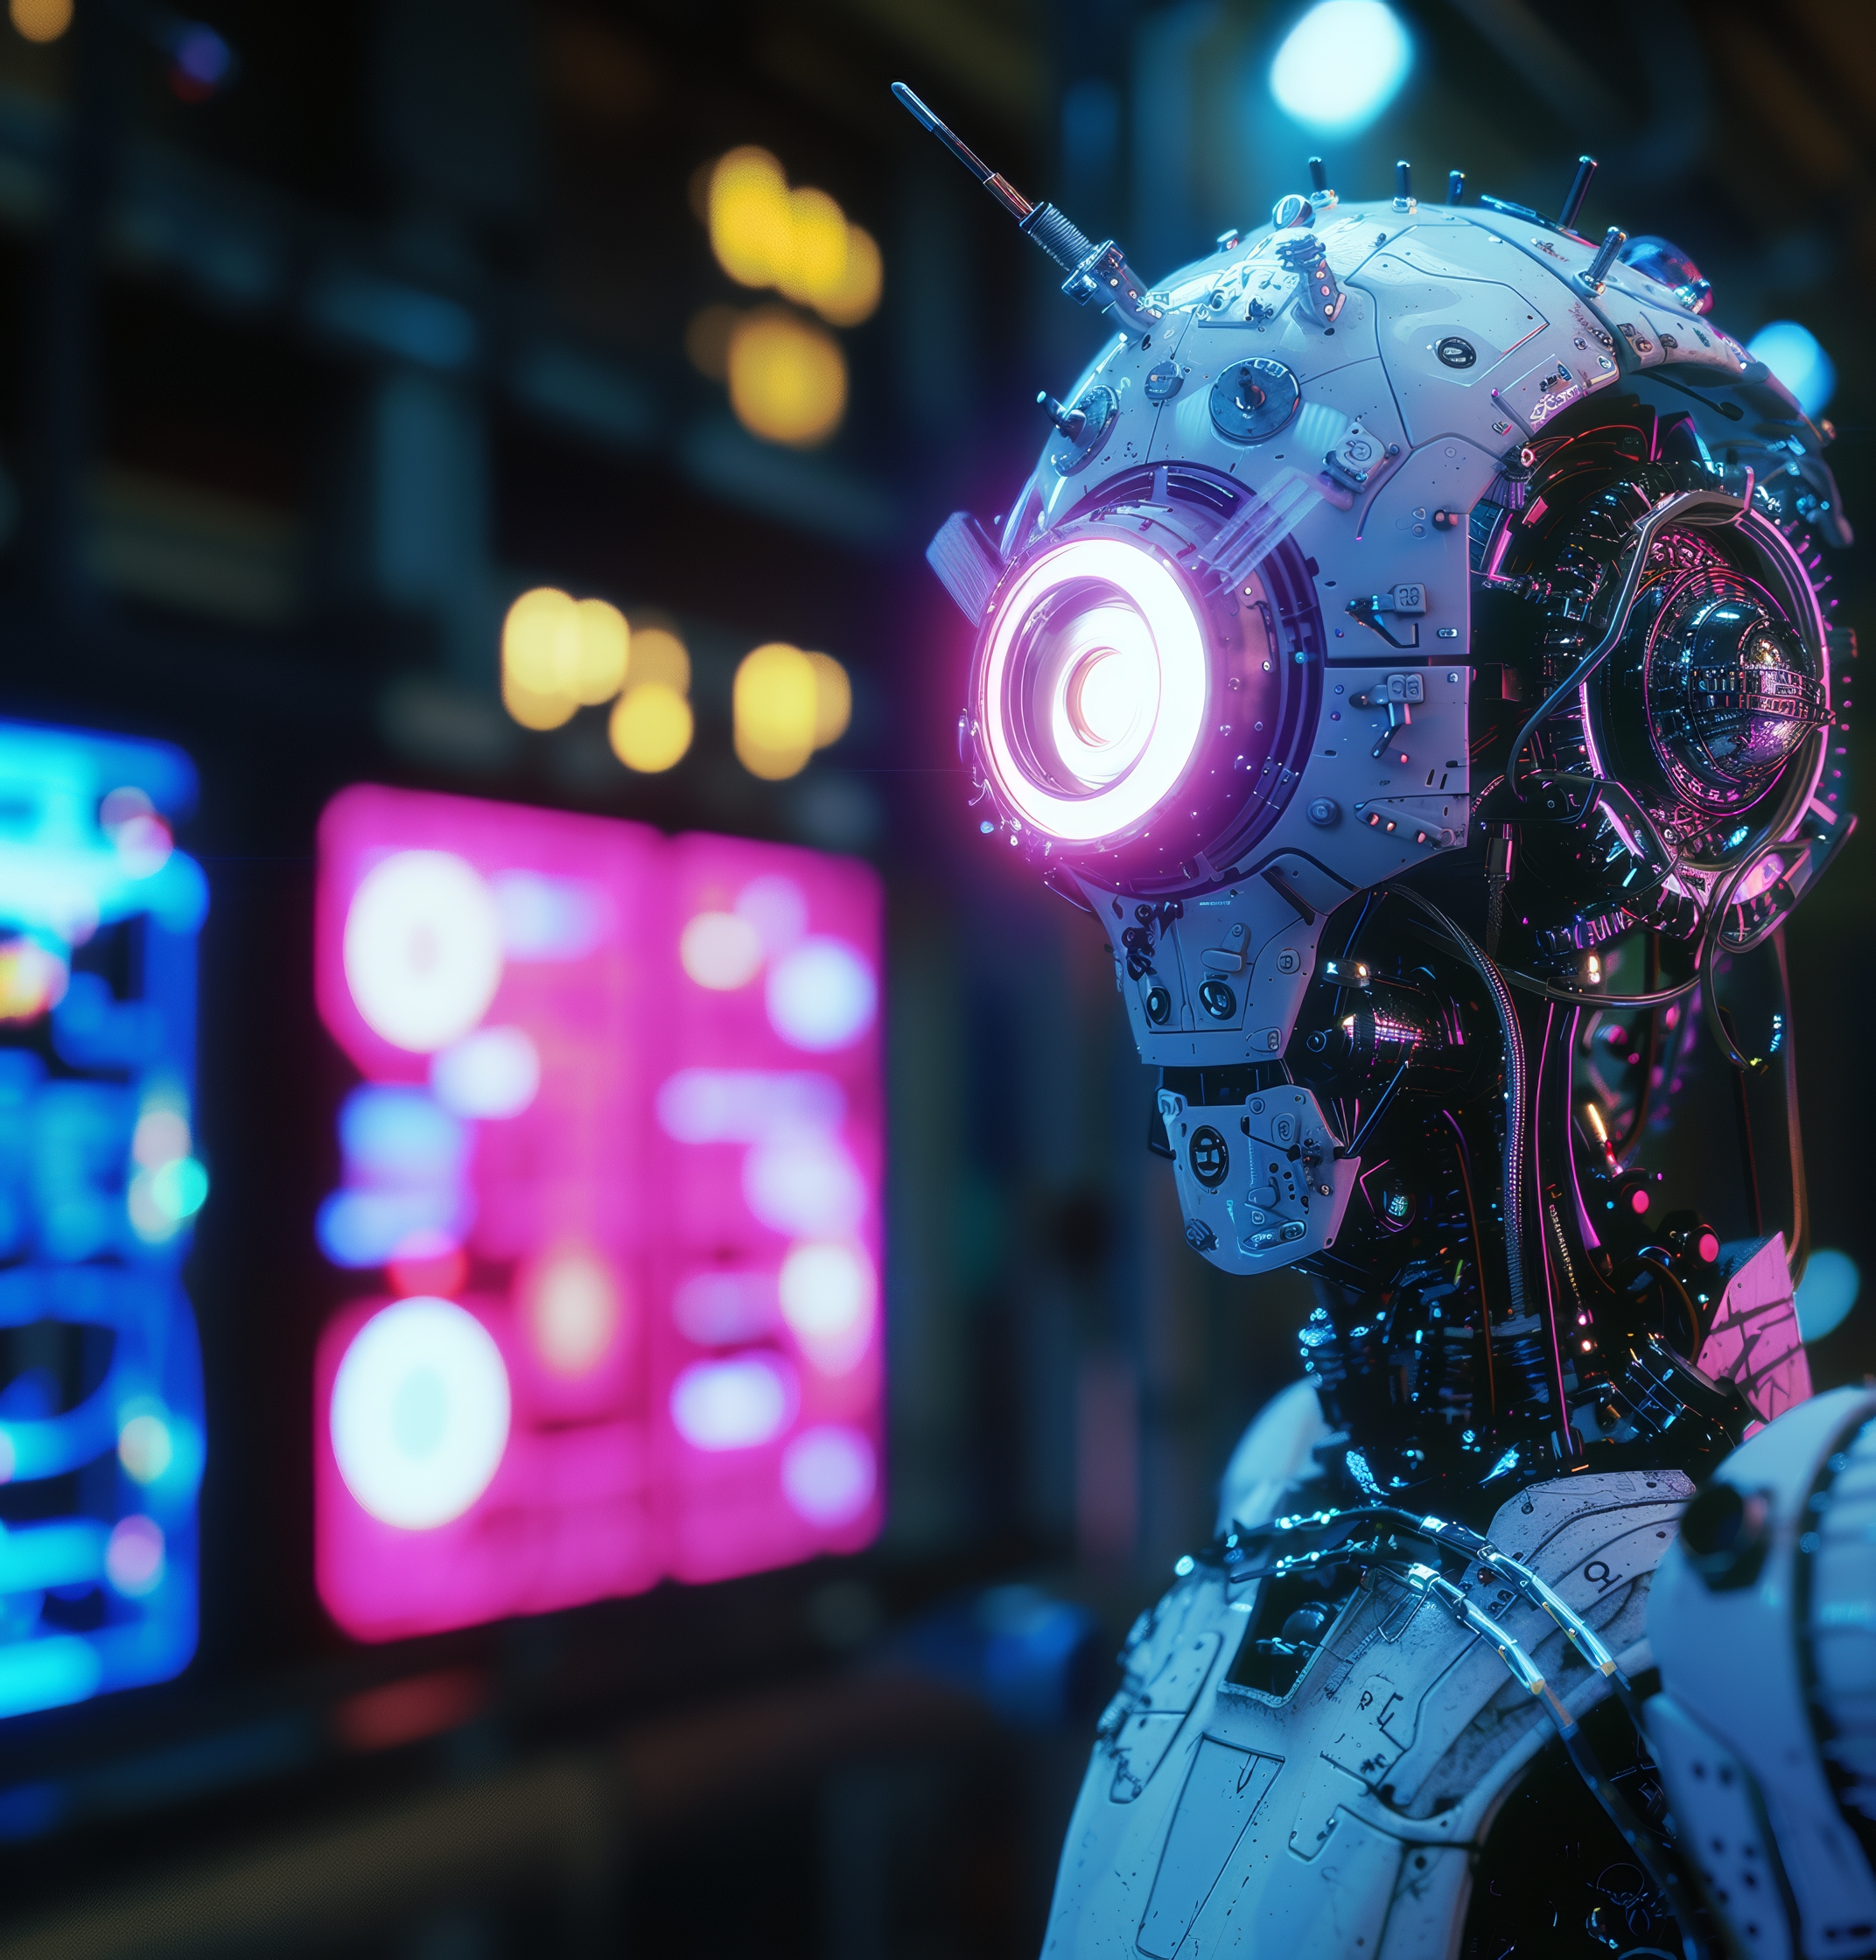 General 2144x2240 AI art futuristic cyberpunk robot science fiction neon signs portrait display blurred blurry background technology glowing